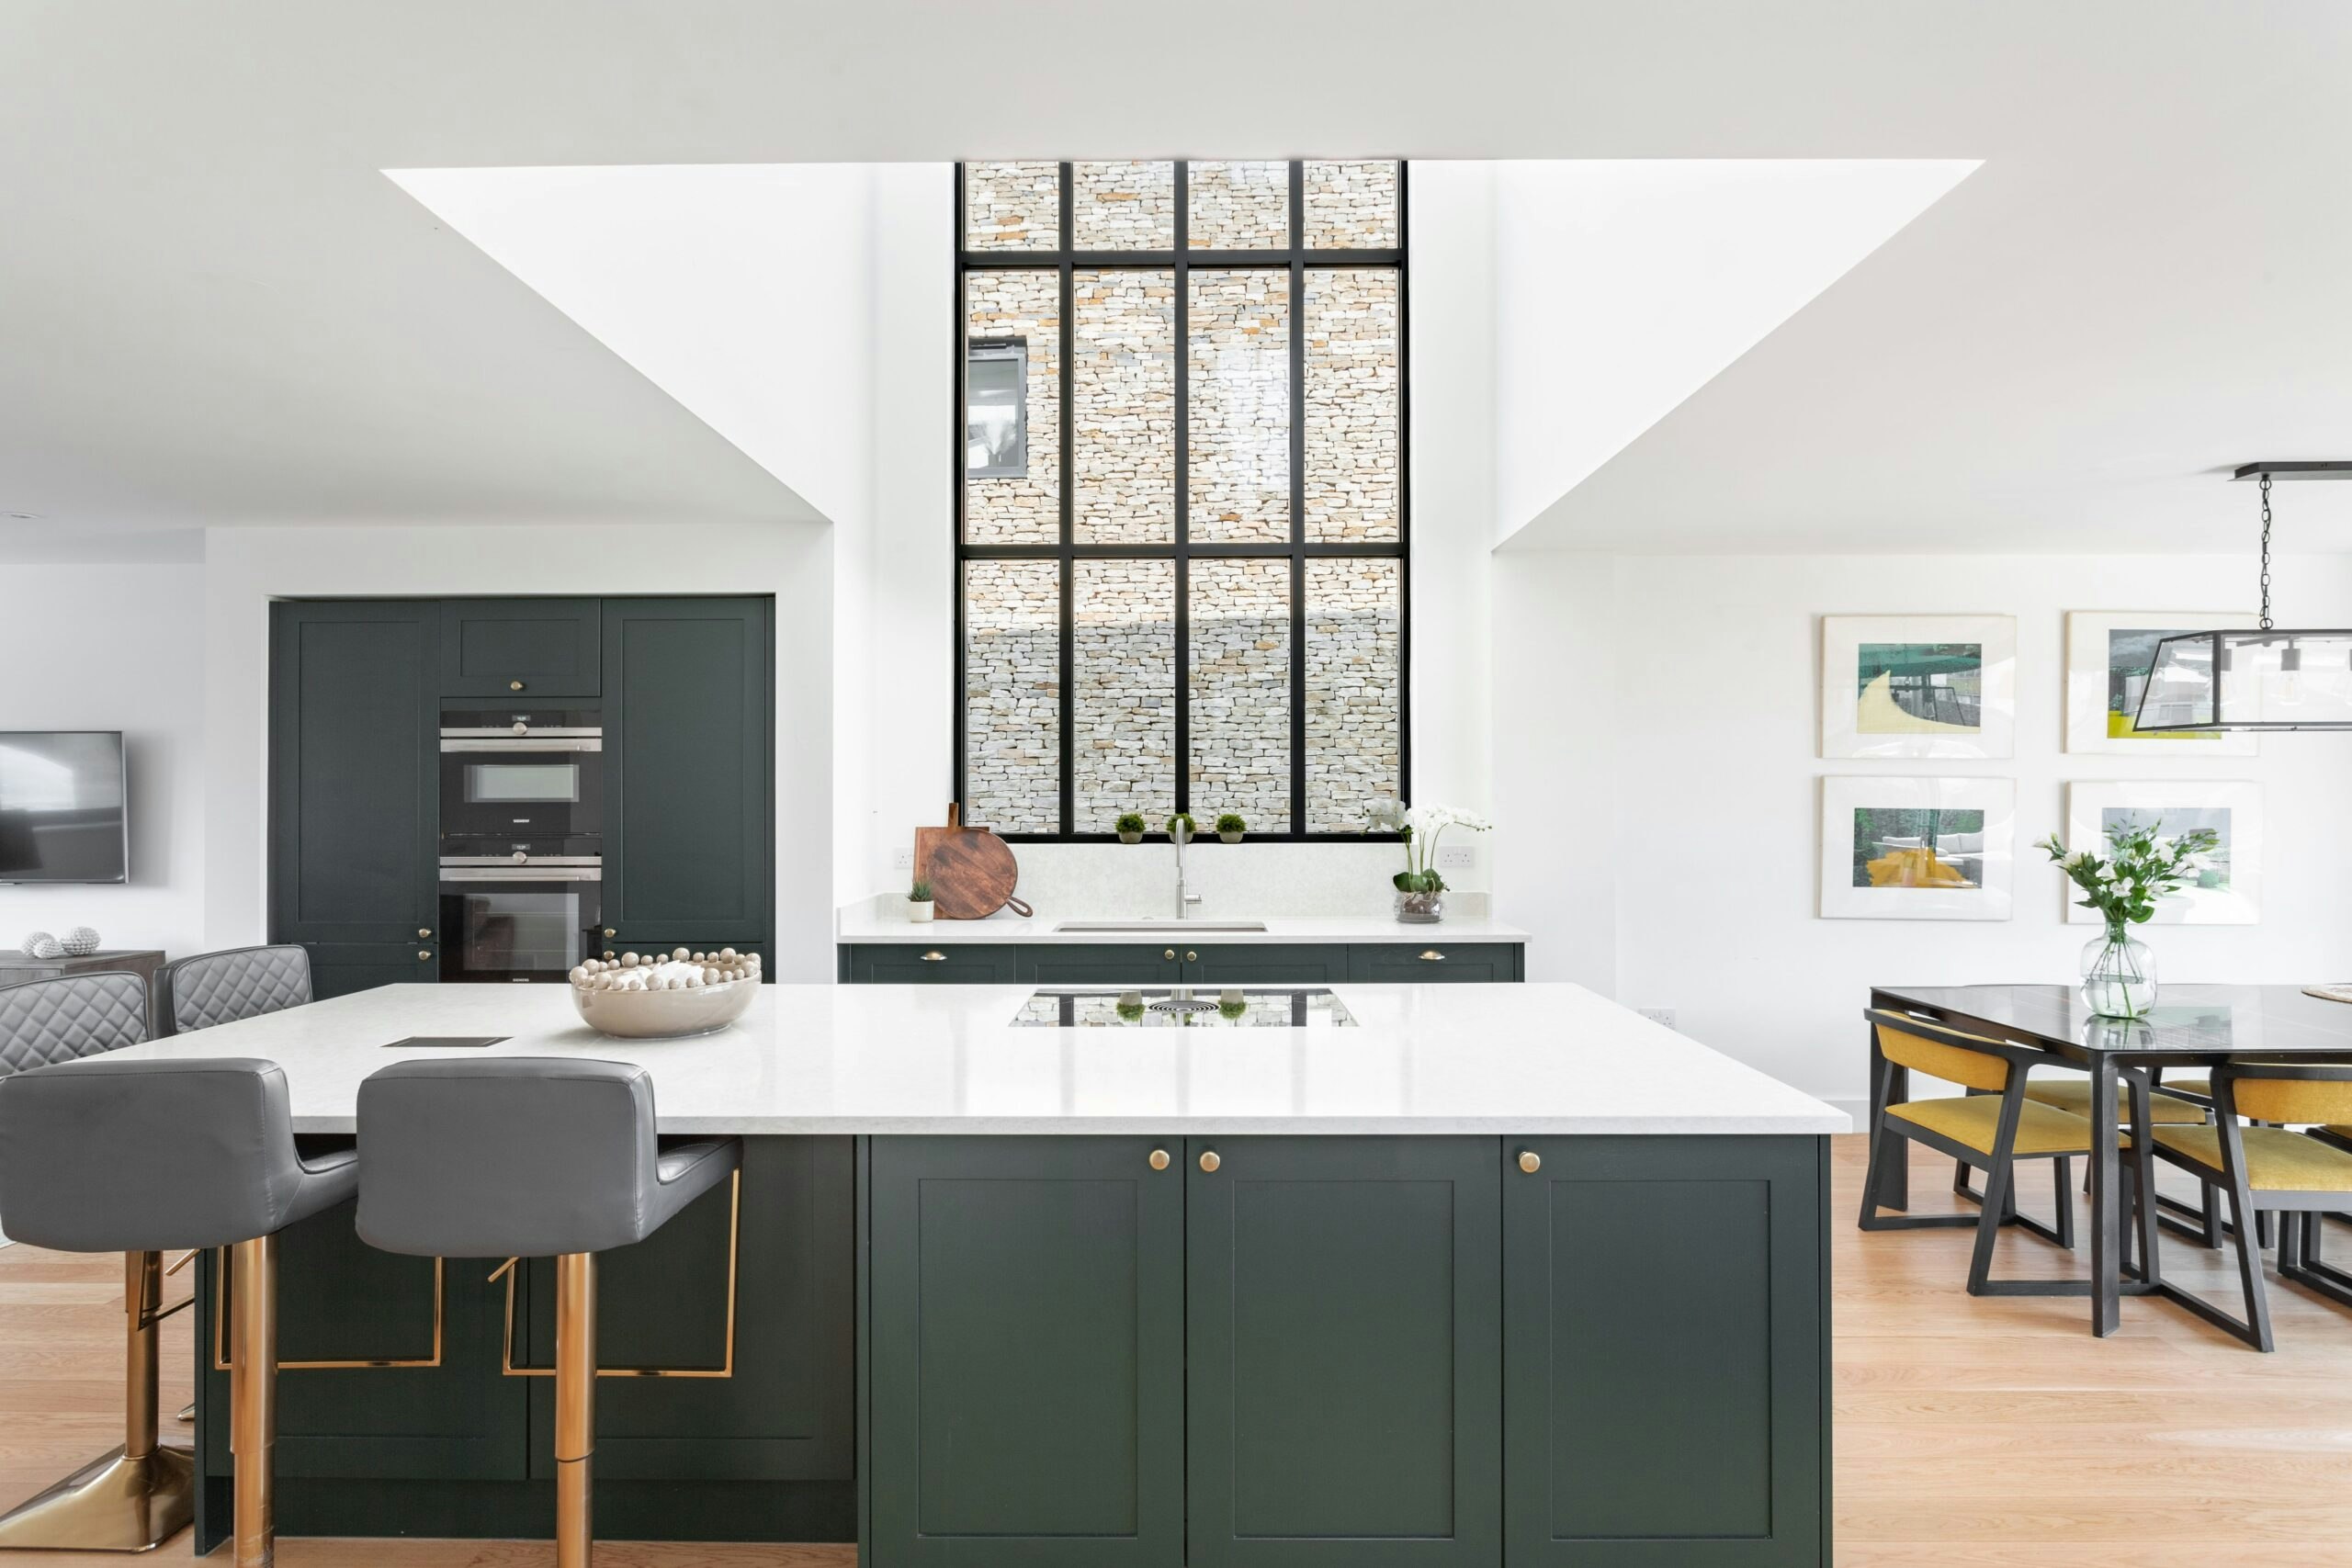 An inviting and homely kitchen in a rich Hunter Green colour. There is a cosy and luxury atmosphere. Sunlight filters in through large windows, illuminating the room with natural light.